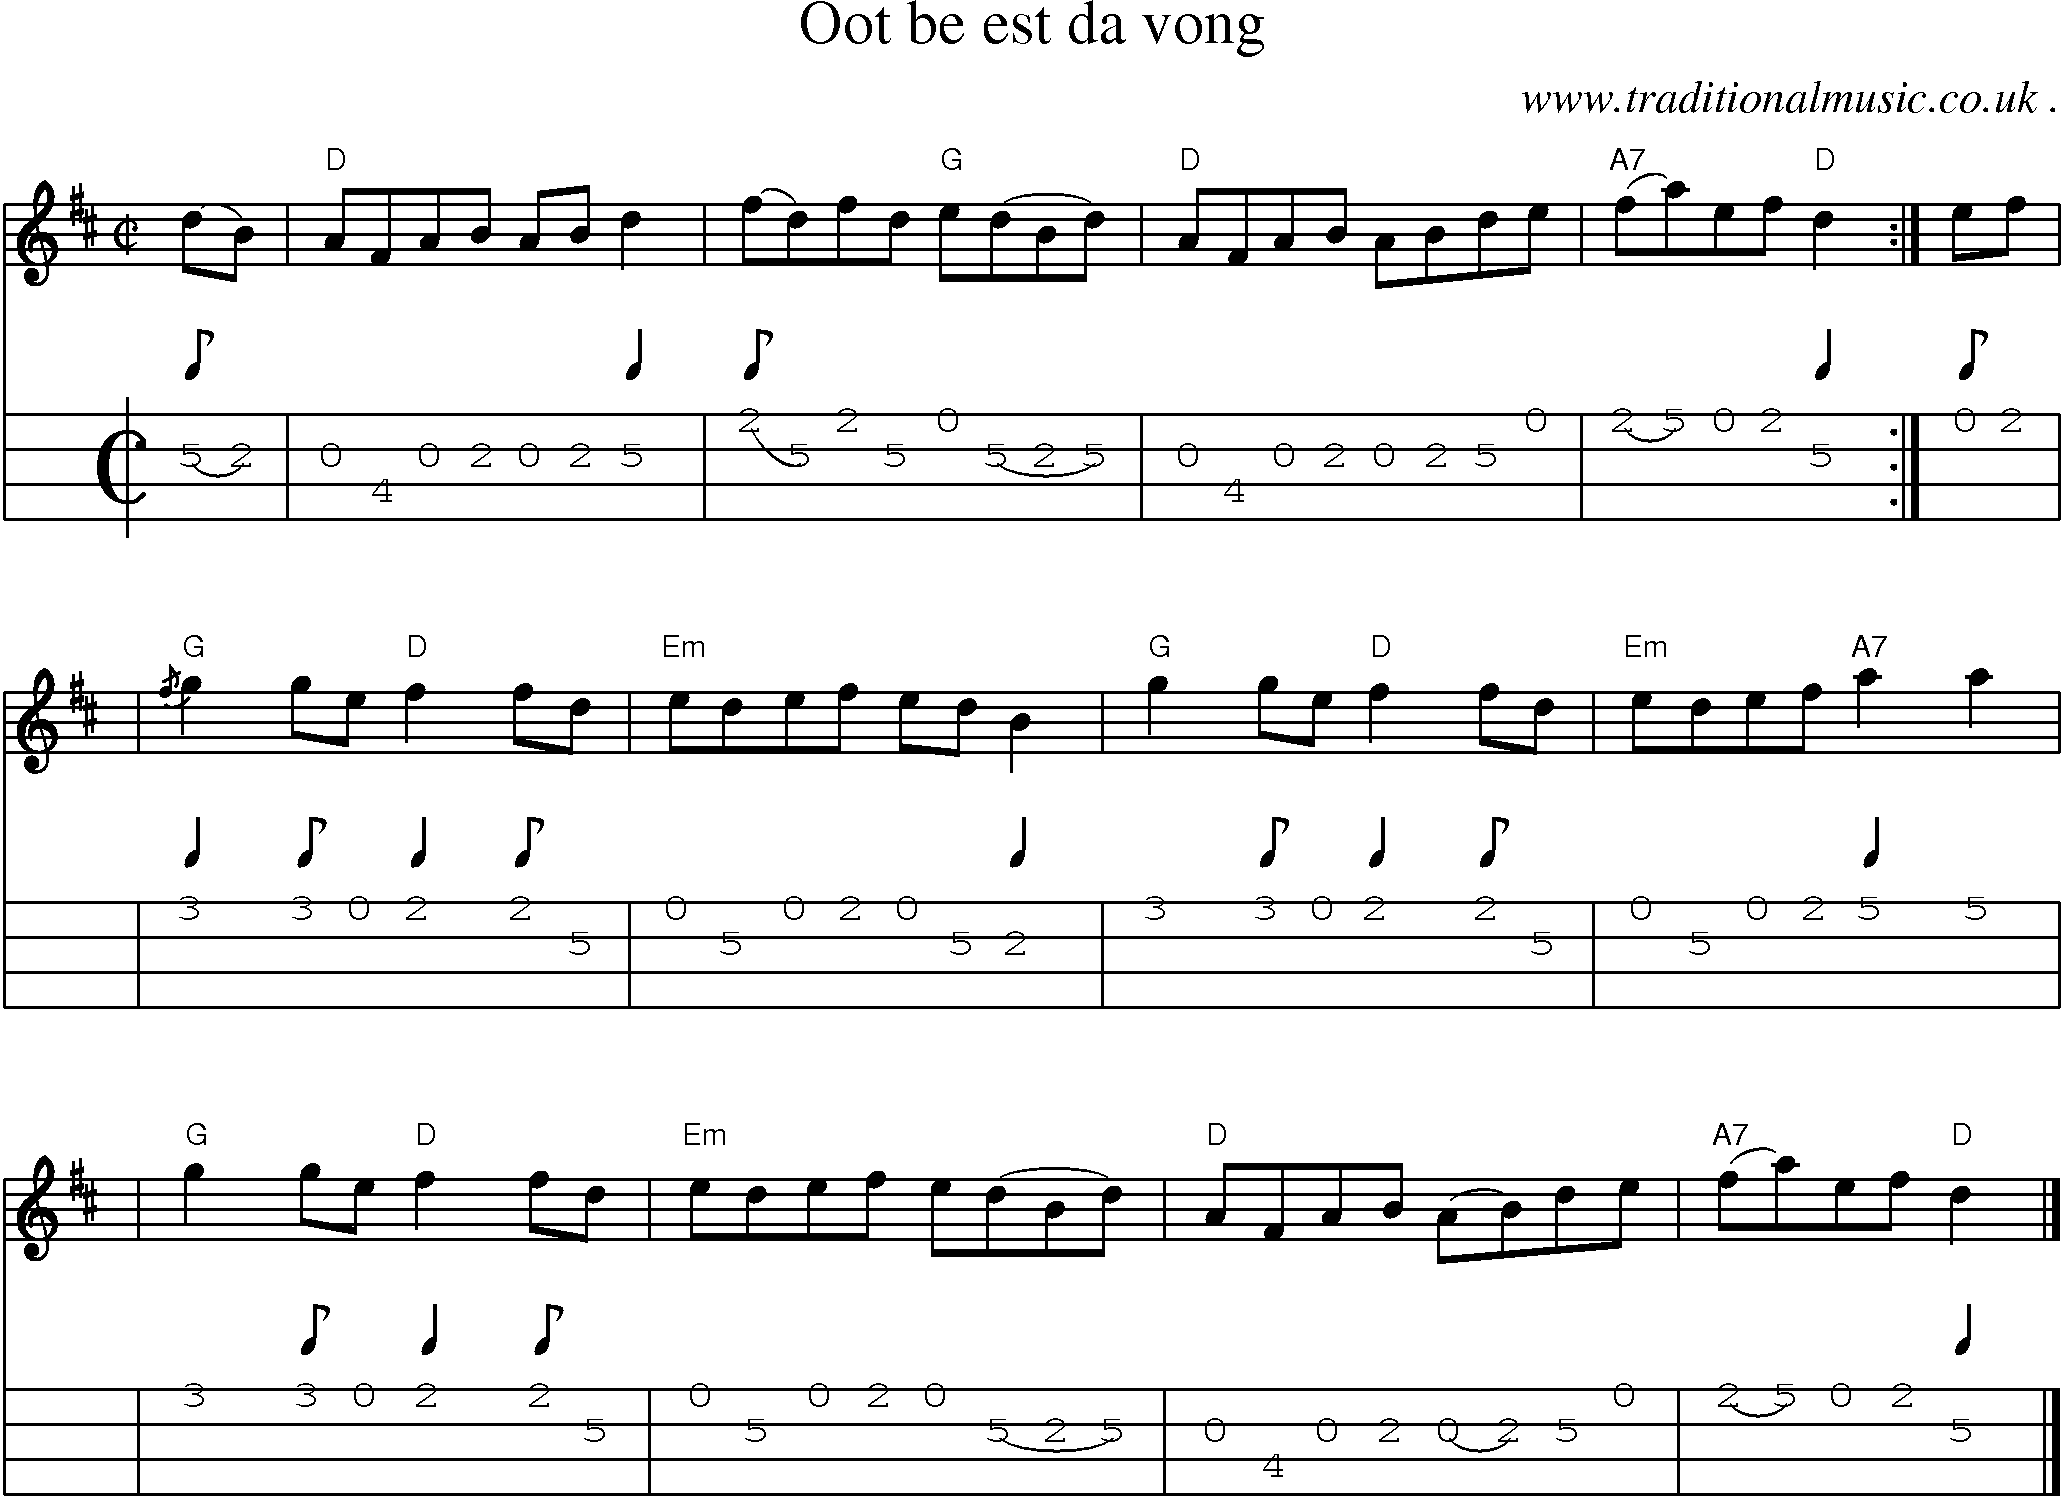 Sheet-music  score, Chords and Mandolin Tabs for Oot Be Est Da Vong